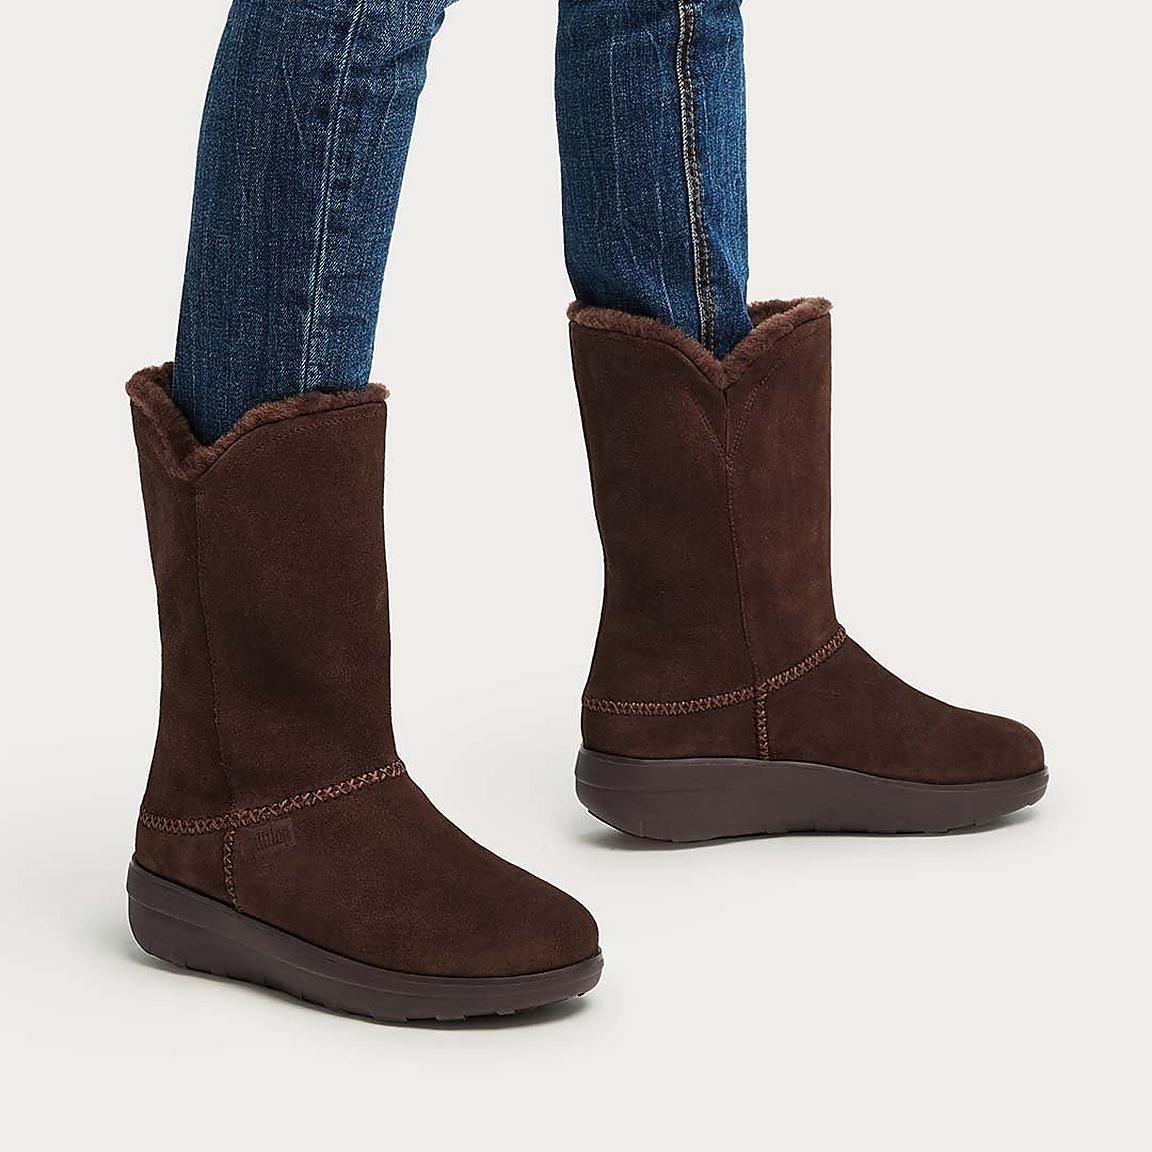 the boots in brown